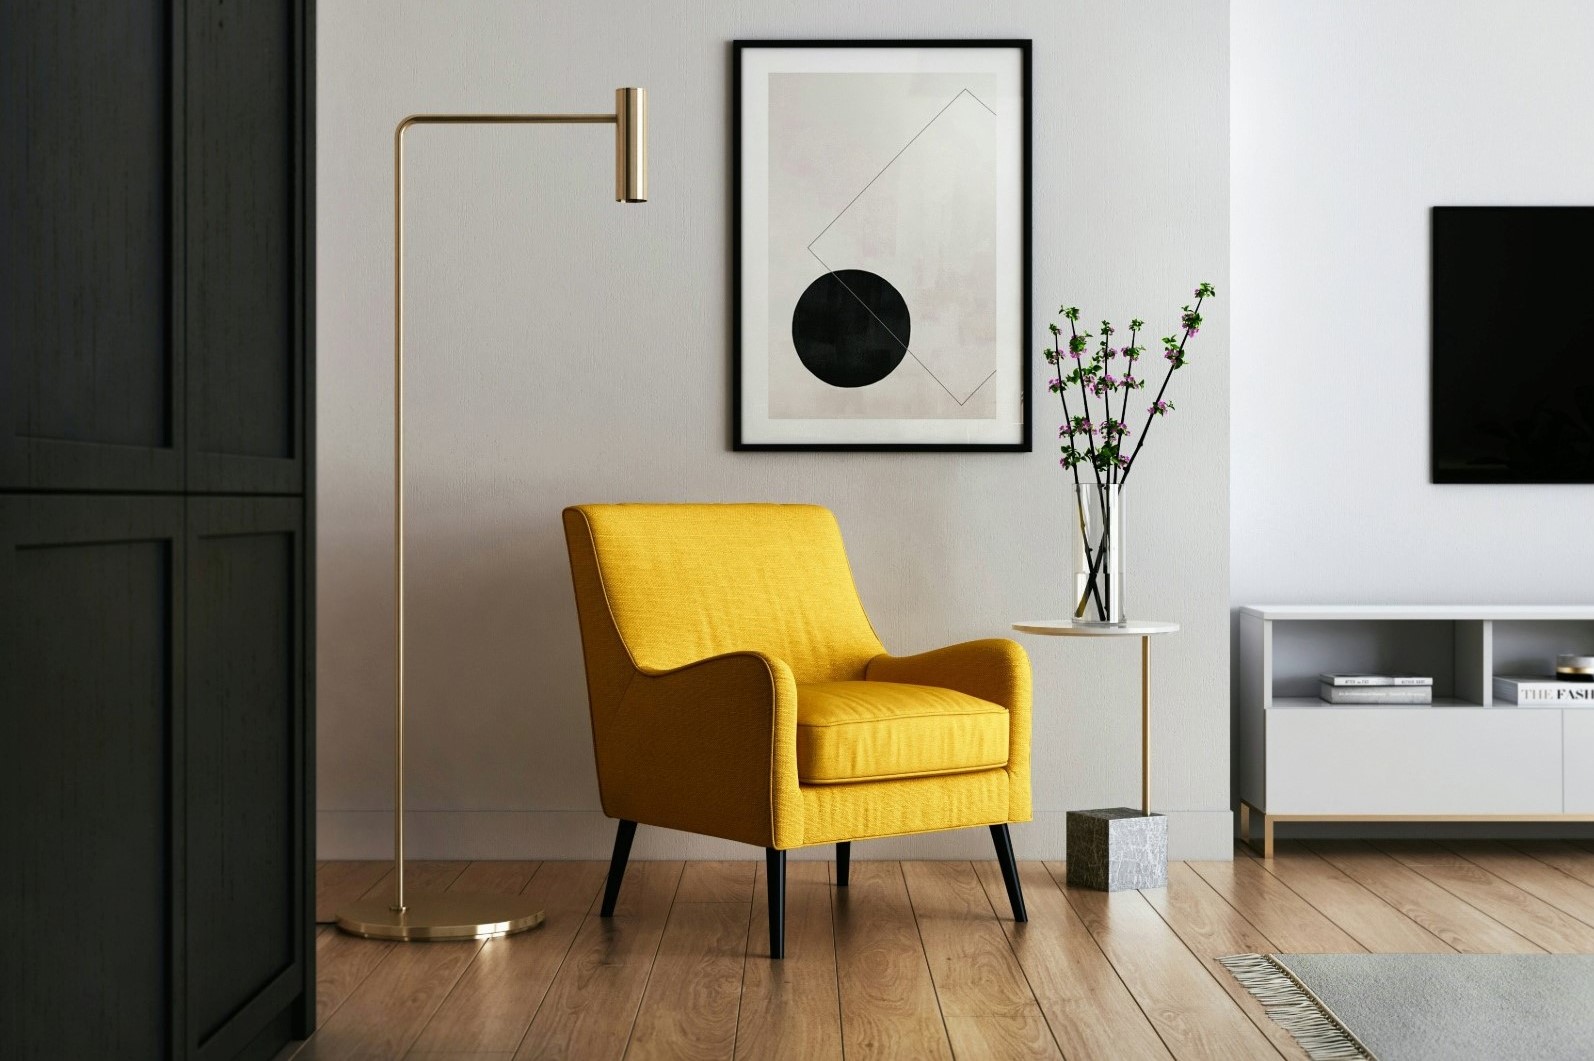 Modern living room in a smart home with a yellow armchair, geometric artwork, floor lamp, and TV